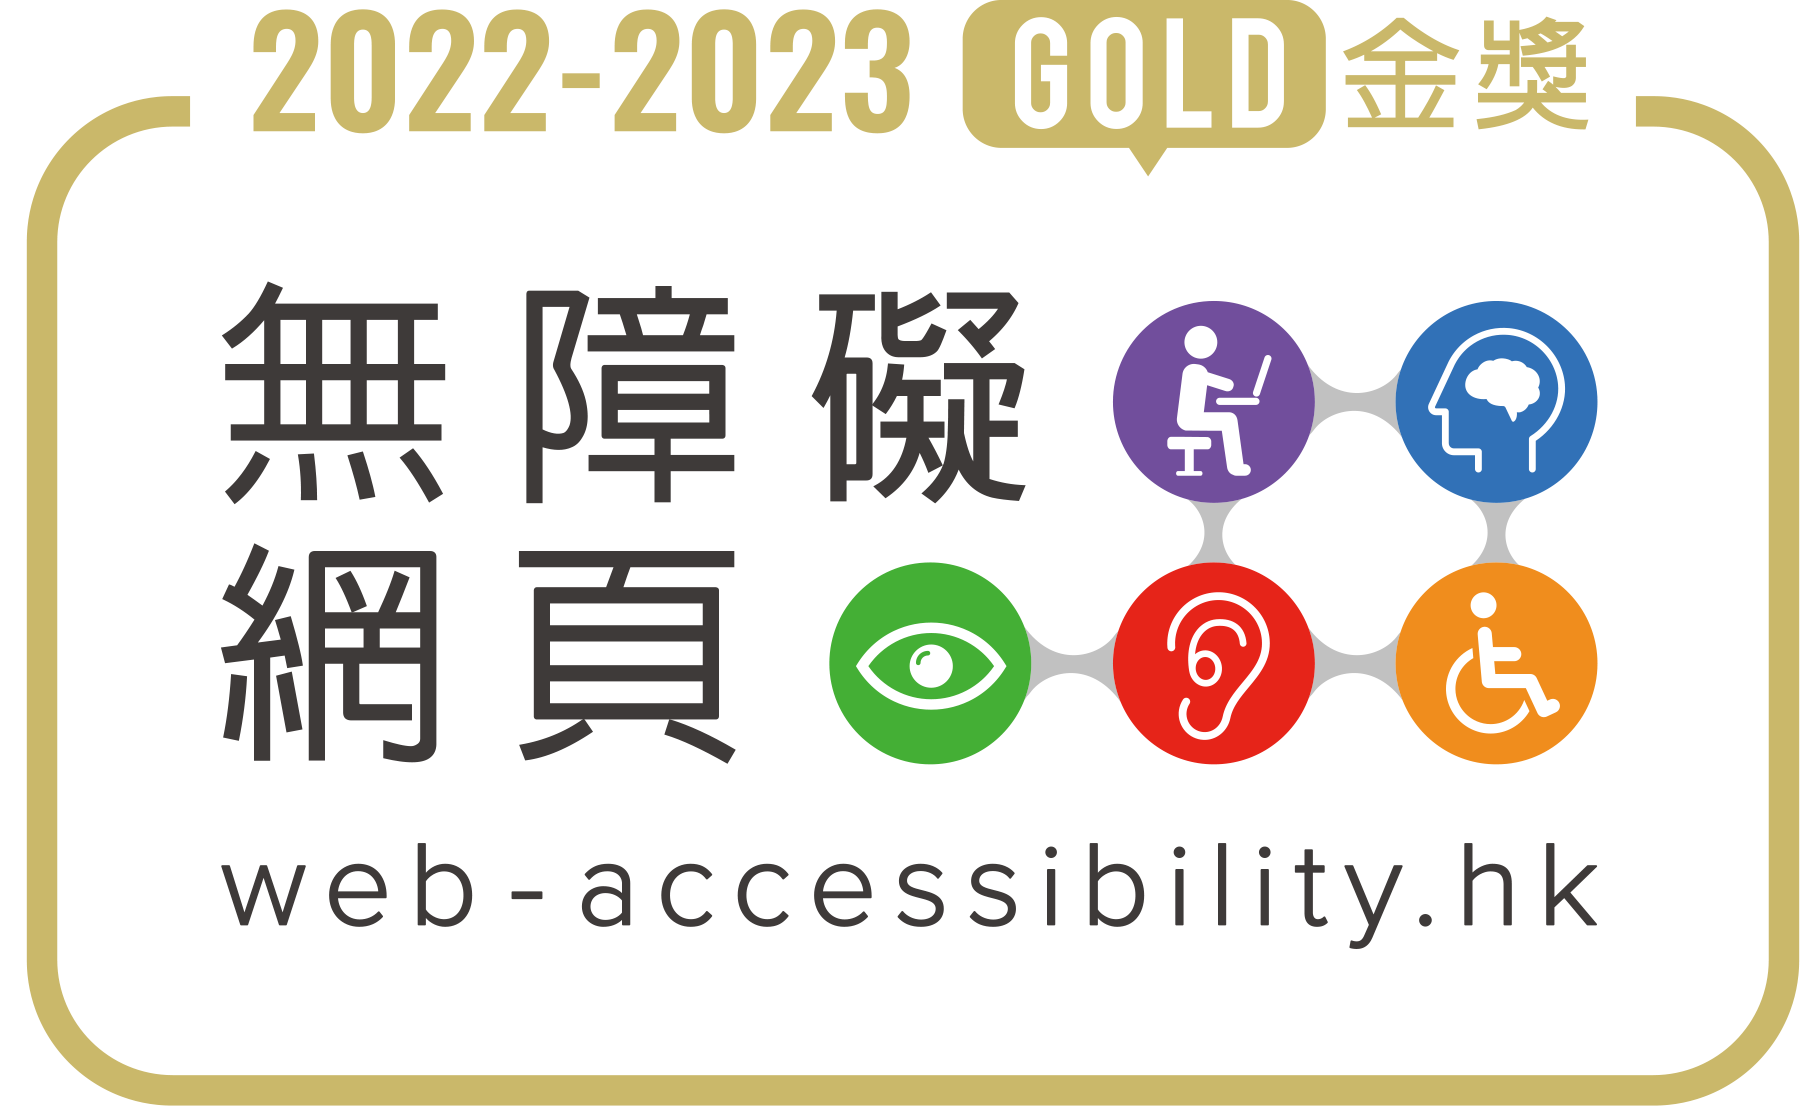 2022-2023 Web Accessibility Recognition Scheme - Gold Award